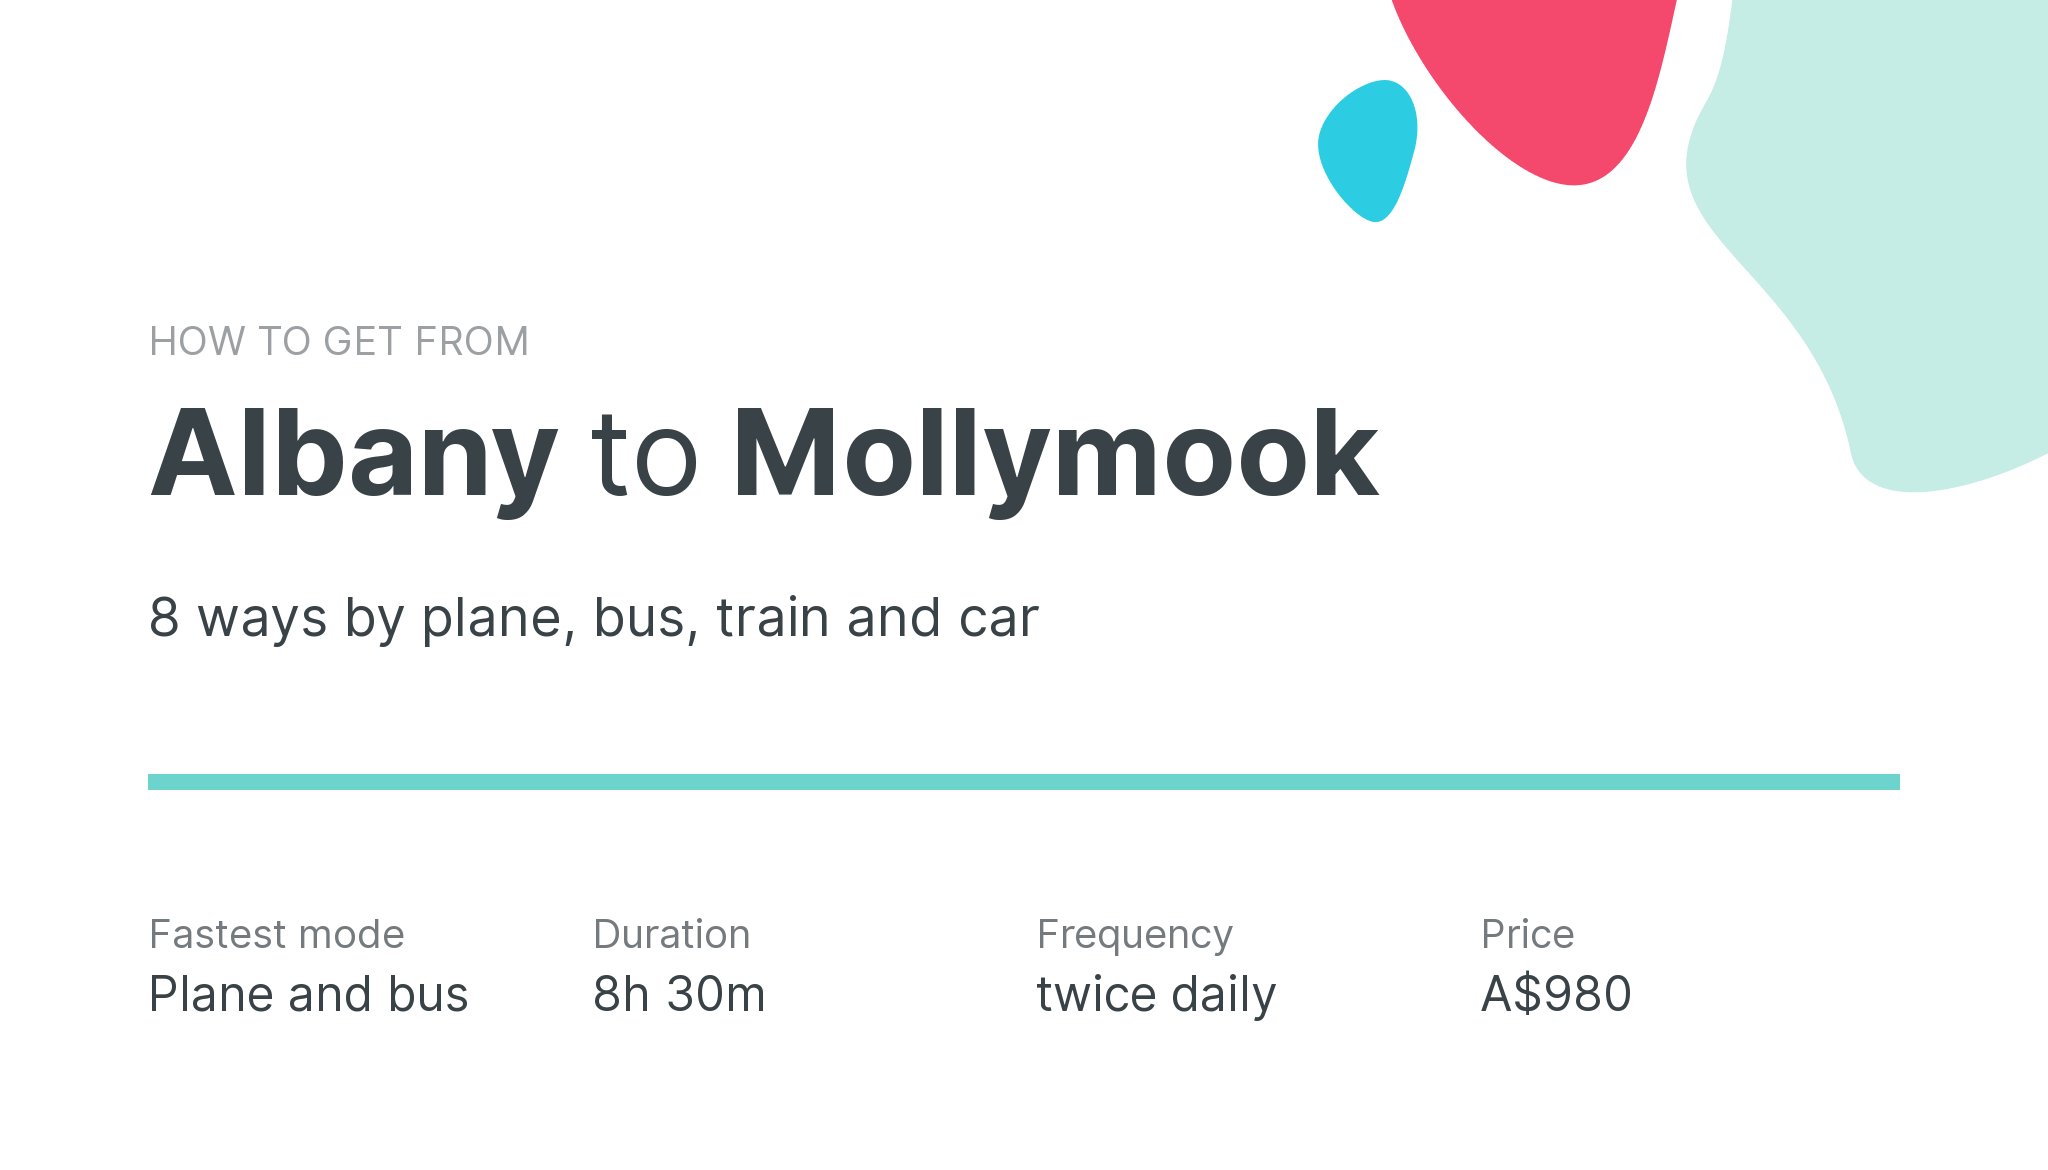 How do I get from Albany to Mollymook